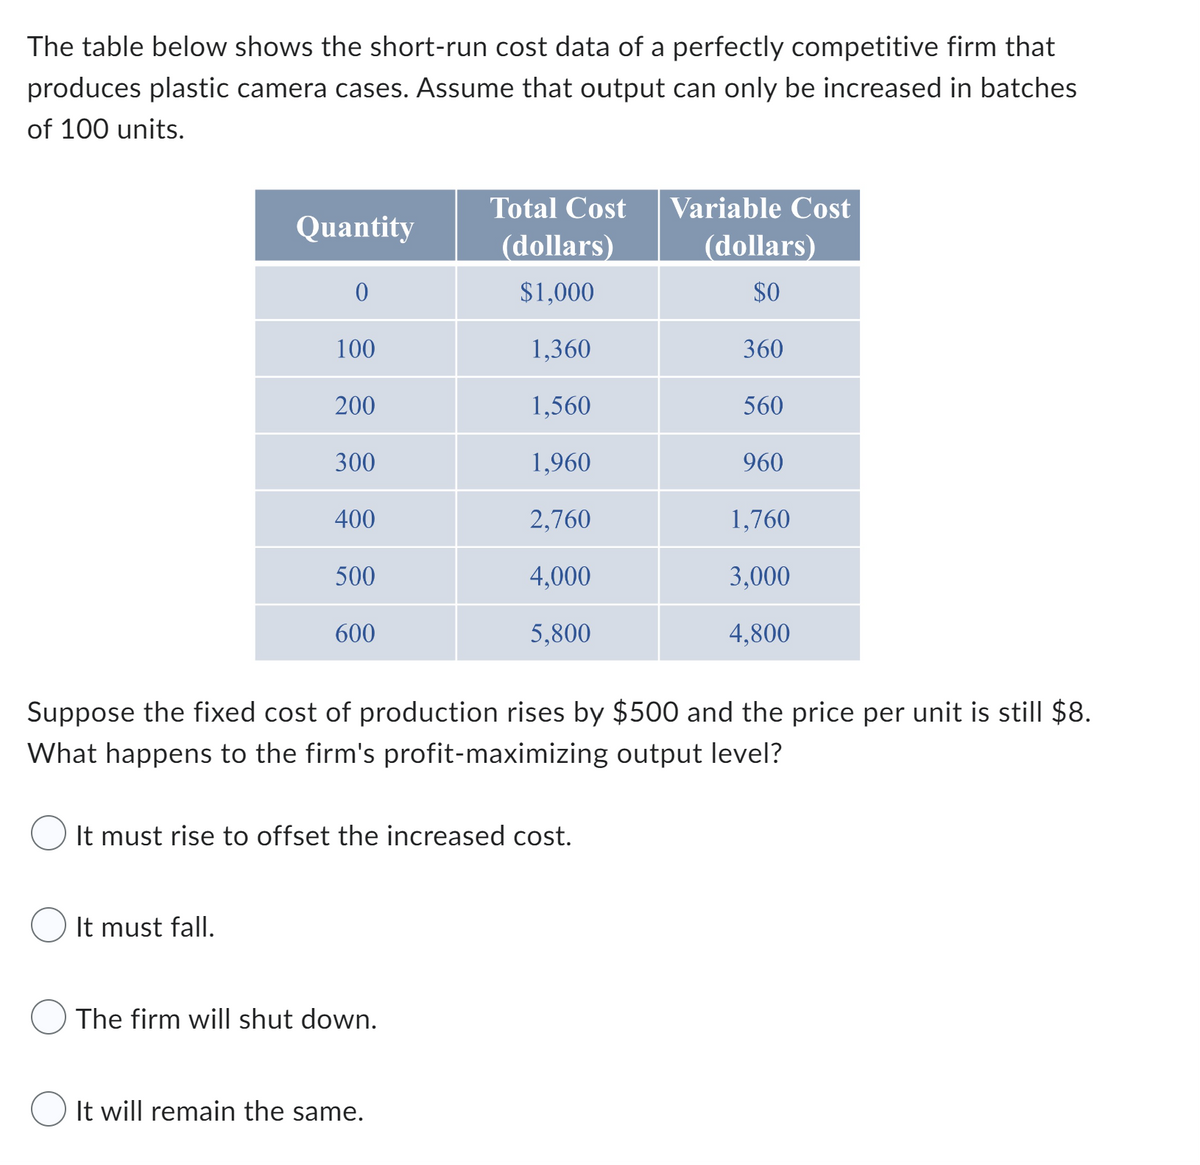 The table below shows the short-run cost data of a perfectly competitive firm that
produces plastic camera cases. Assume that output can only be increased in batches
of 100 units.
Quantity
0
It must fall.
100
200
300
400
500
600
It must rise to offset the increased cost.
Total Cost Variable Cost
(dollars)
(dollars)
$1,000
$0
1,360
360
1,560
560
1,960
2,760
4,000
5,800
Suppose the fixed cost of production rises by $500 and the price per unit is still $8.
What happens to the firm's profit-maximizing output level?
The firm will shut down.
O It will remain the same.
960
1,760
3,000
4,800